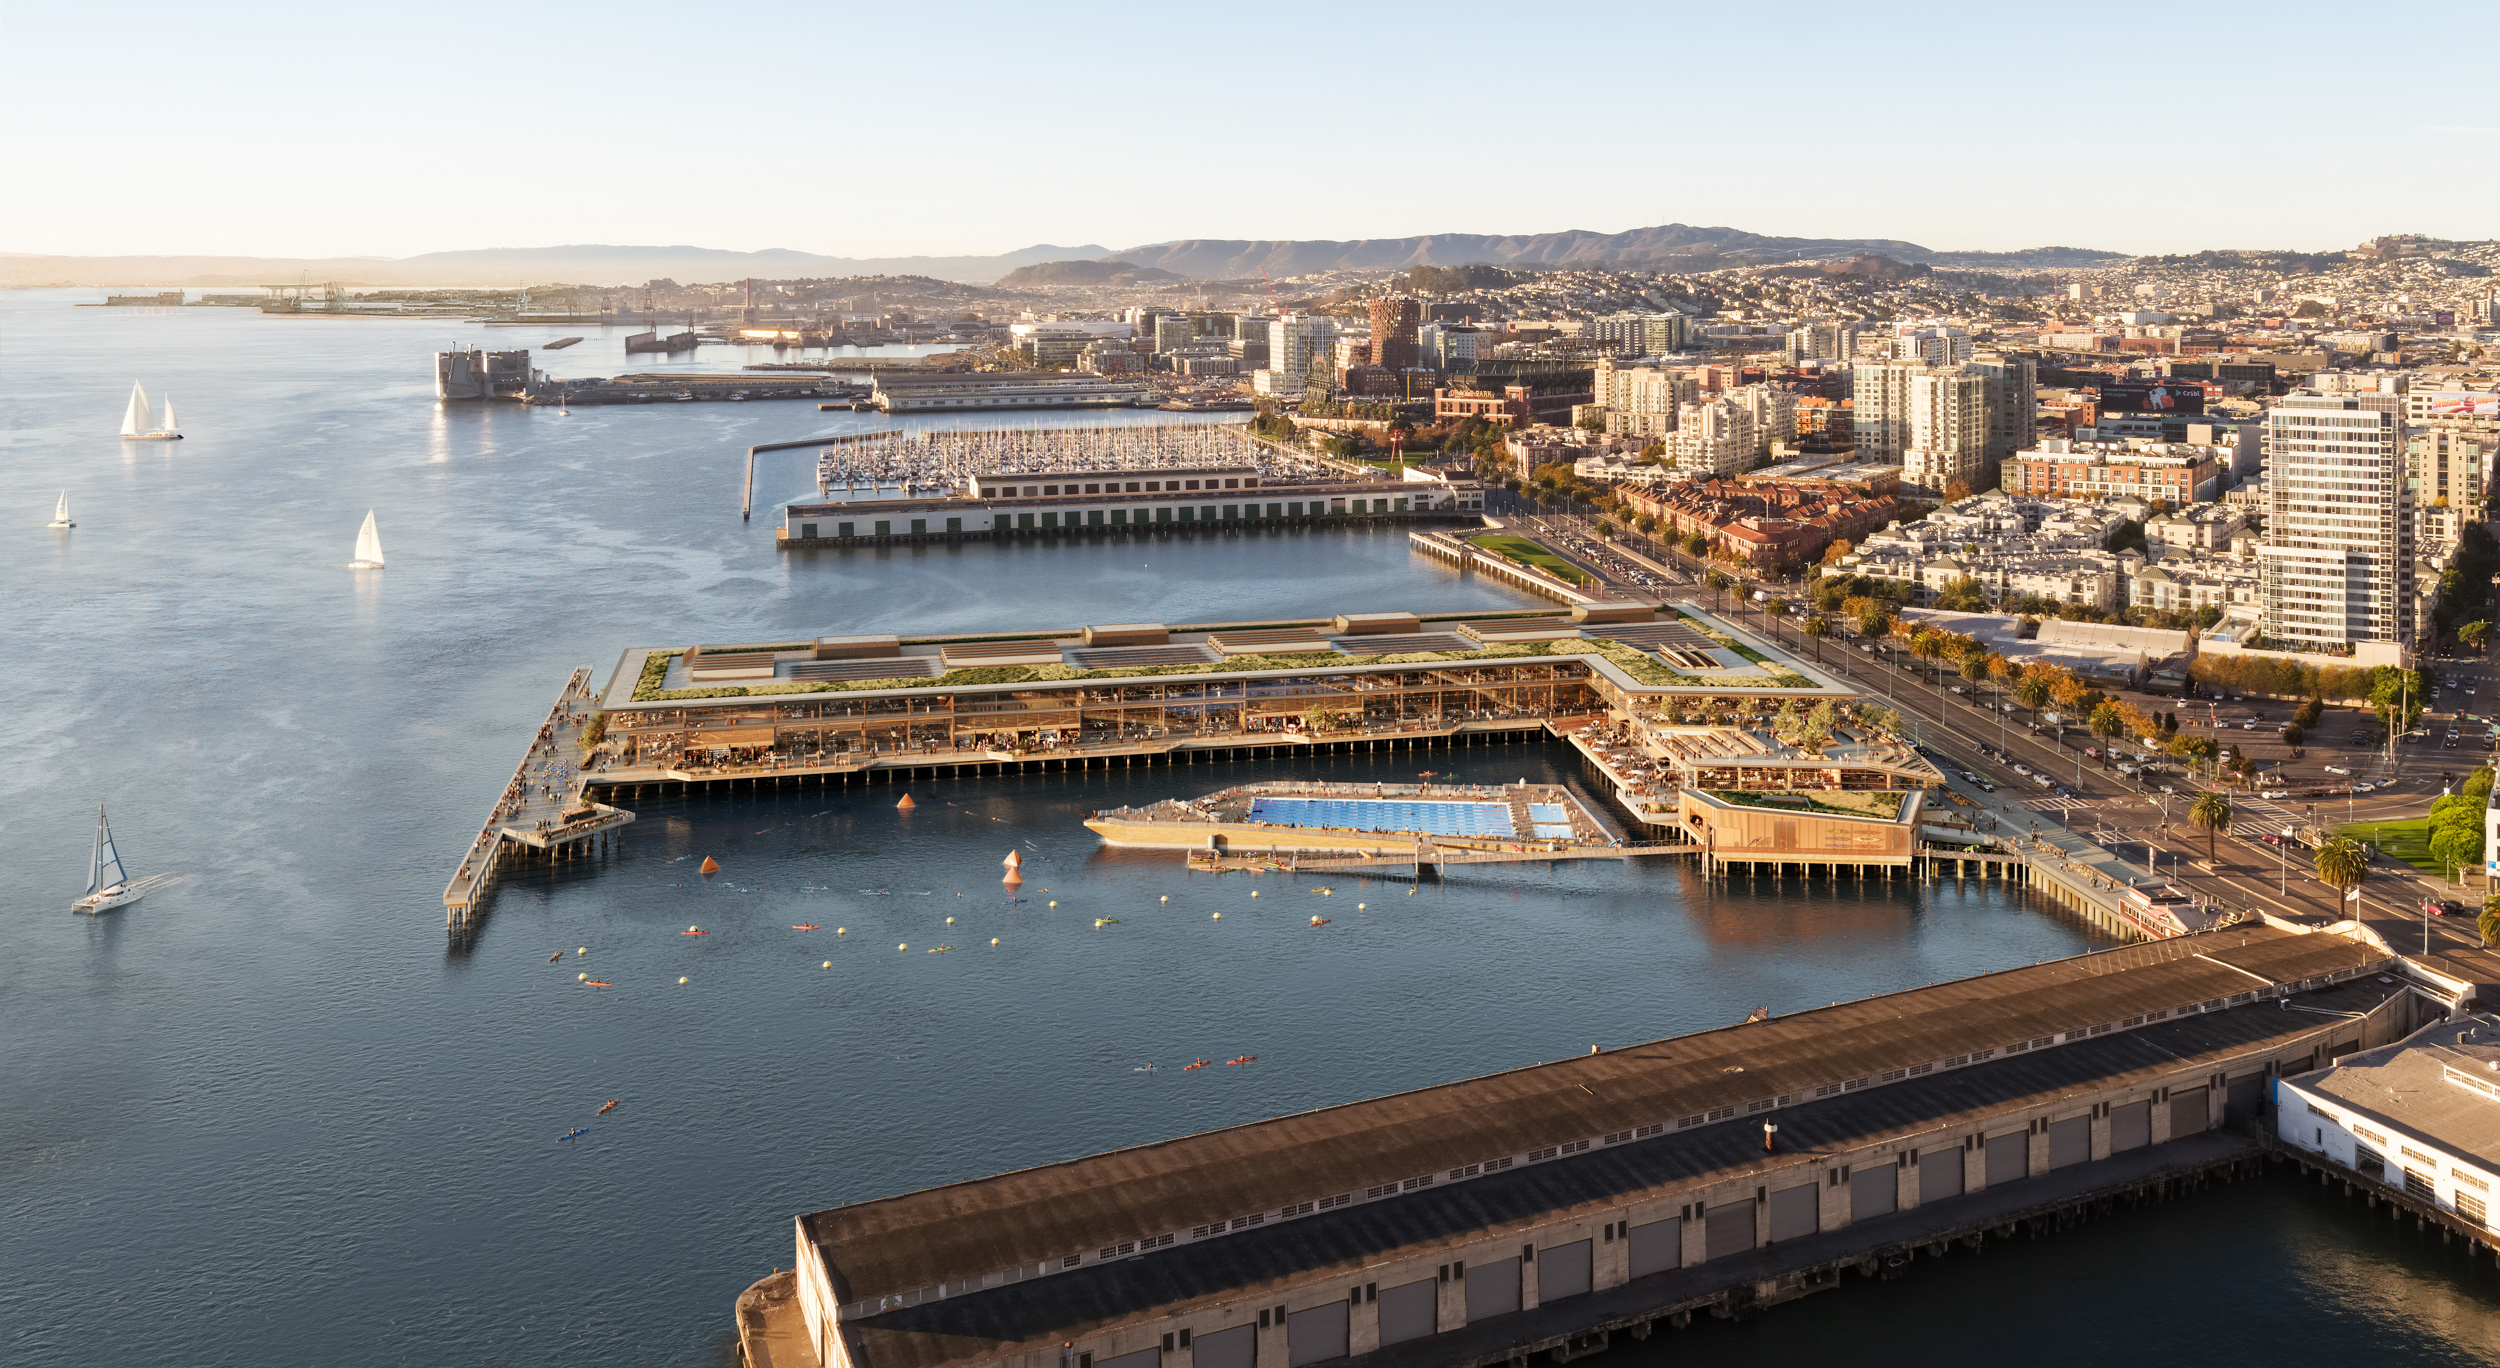 Piers 30-32 overview looking southwest, rendering by Steelblue courtesy Strada